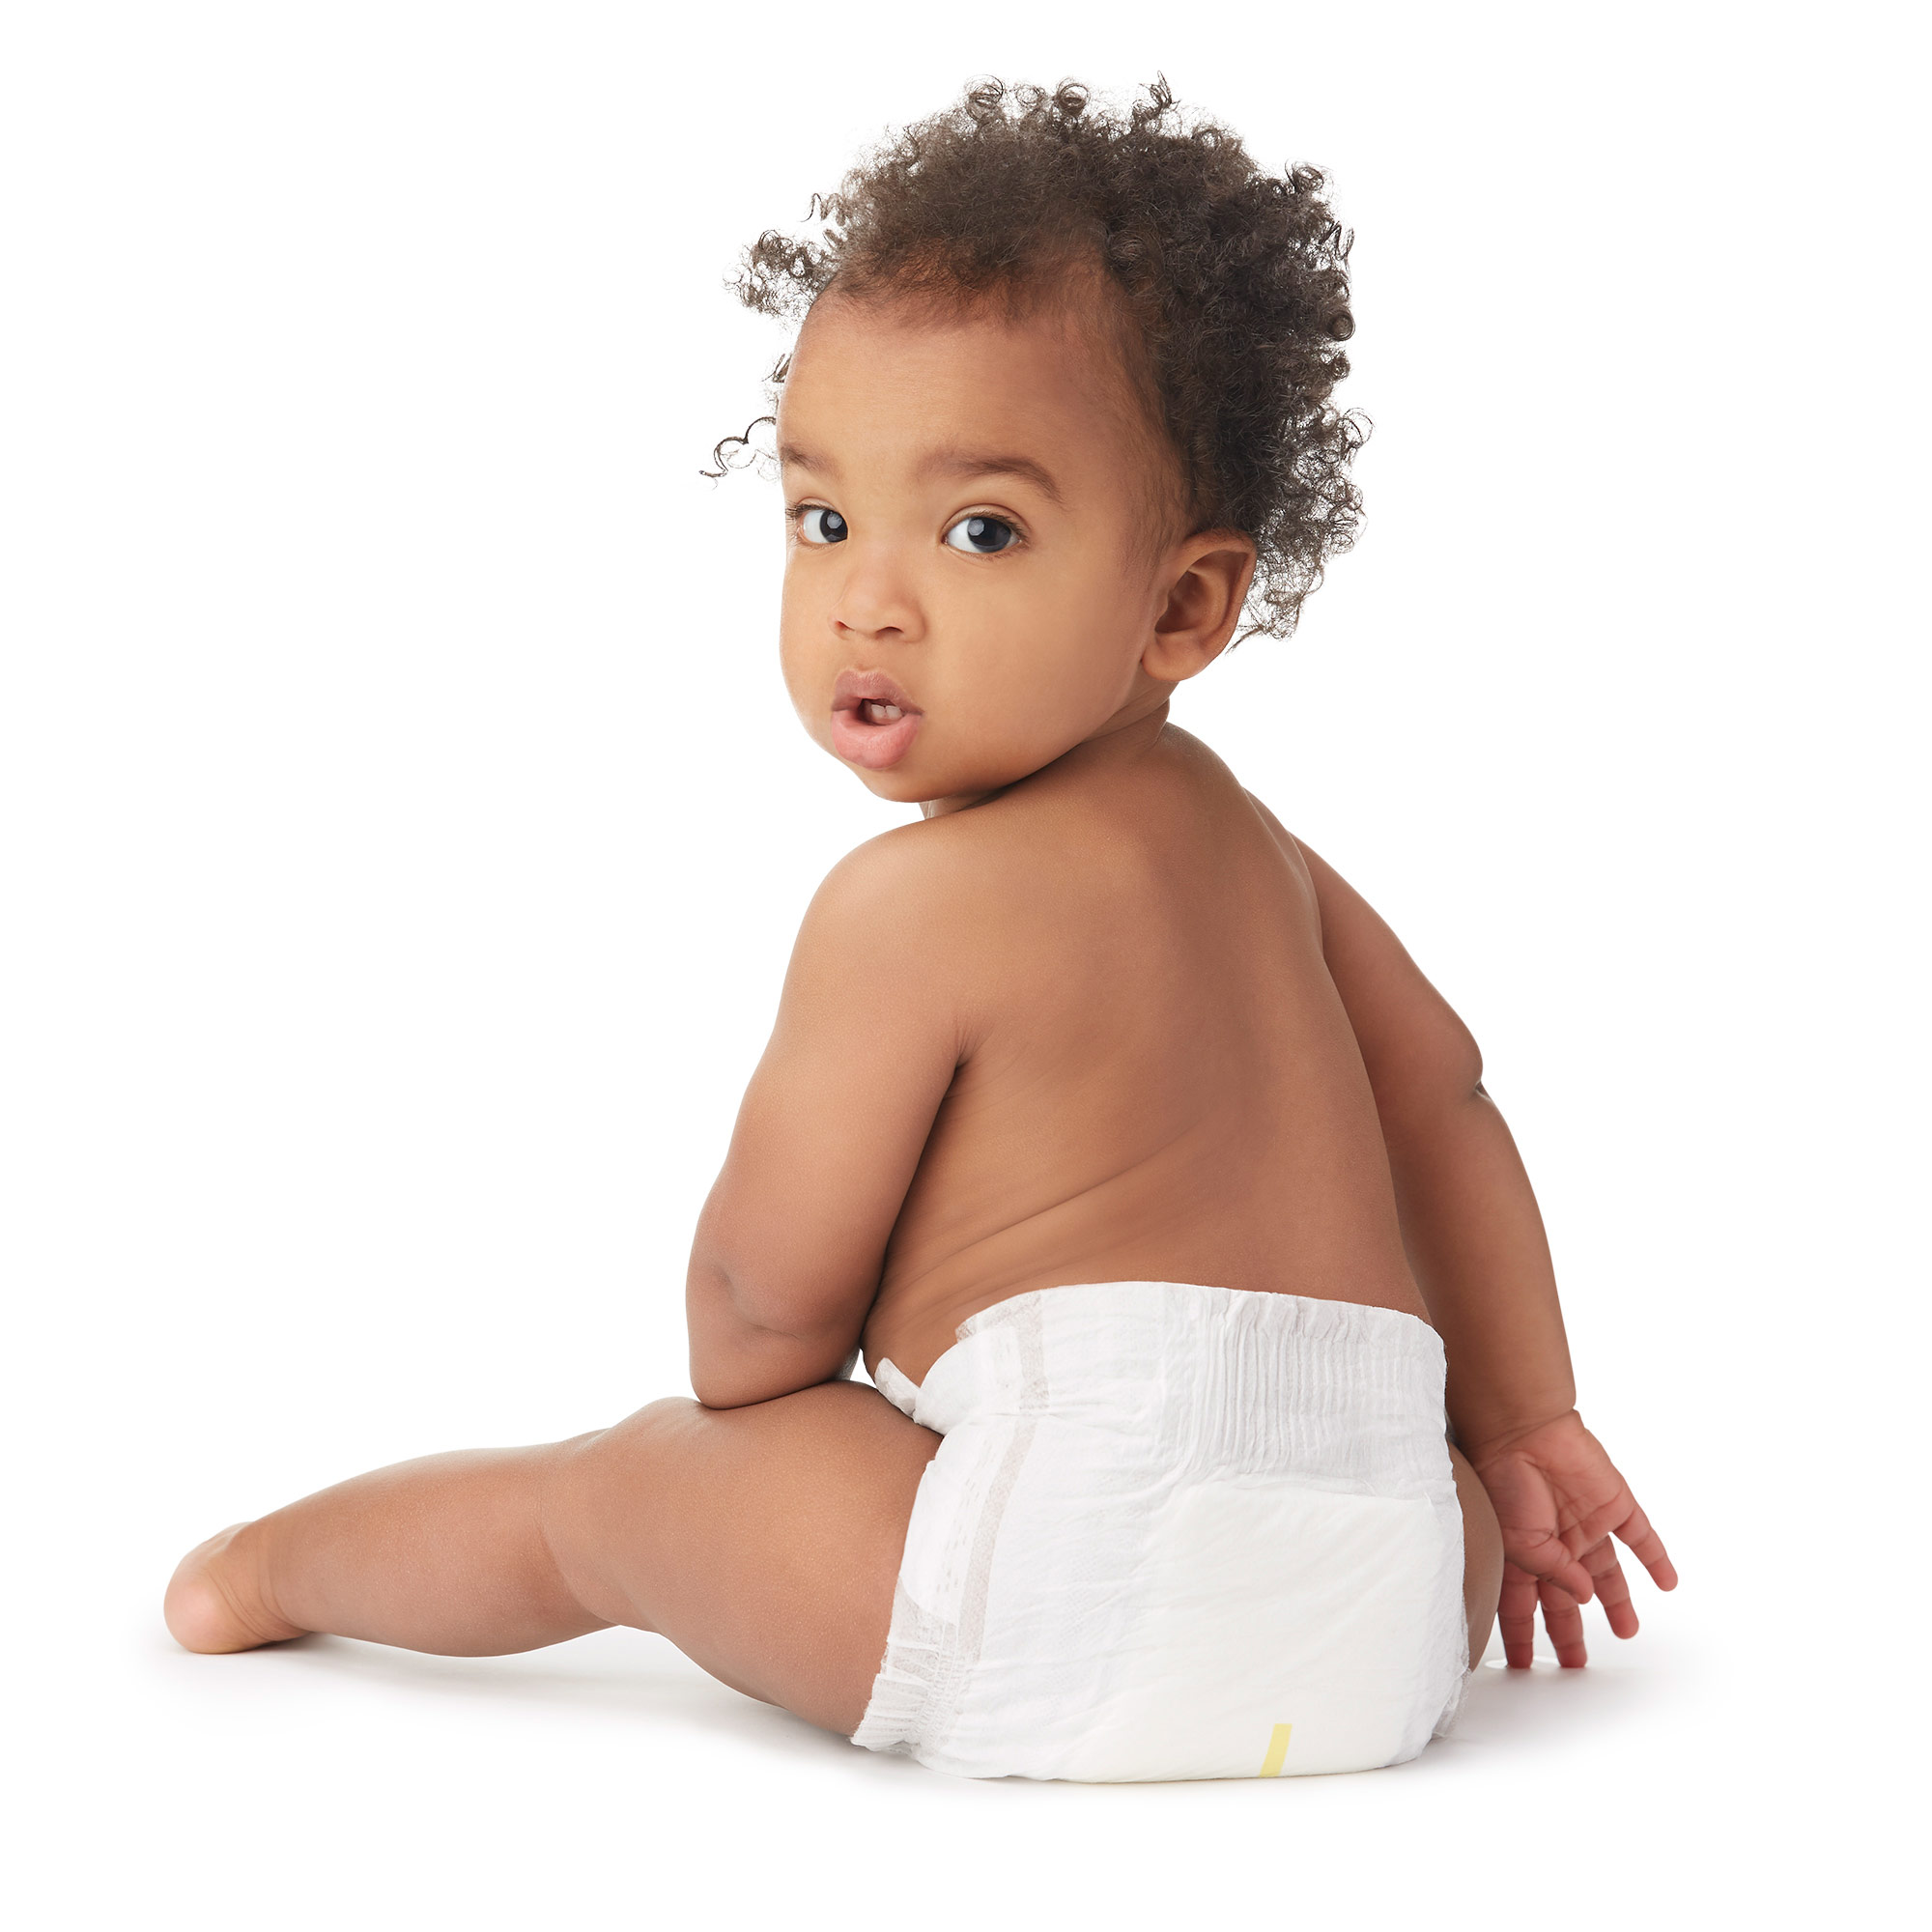 Honest Clean Conscious Baby Diaper, White, Size 6, Advanced Leak protection, Plant-Based